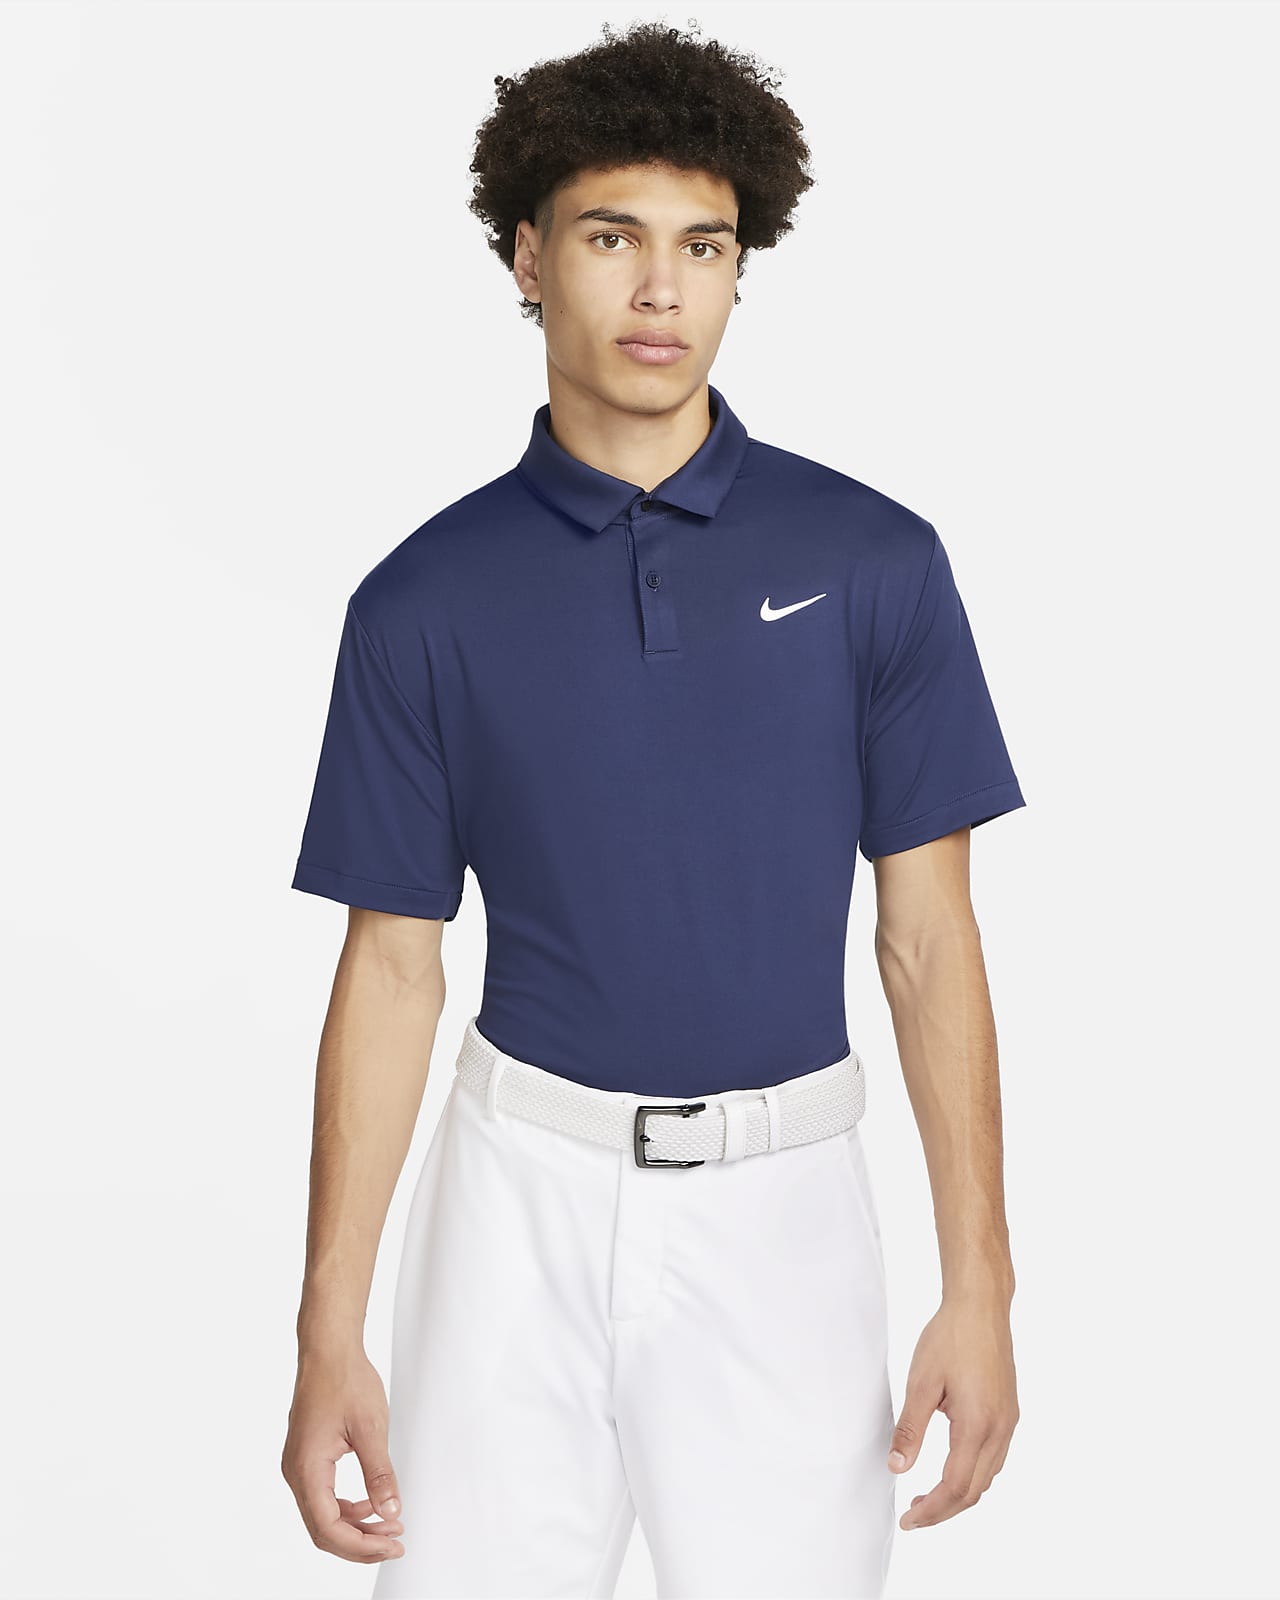 Nike The Athletic Dept Men Polo Shirt Short Sleeves Casual